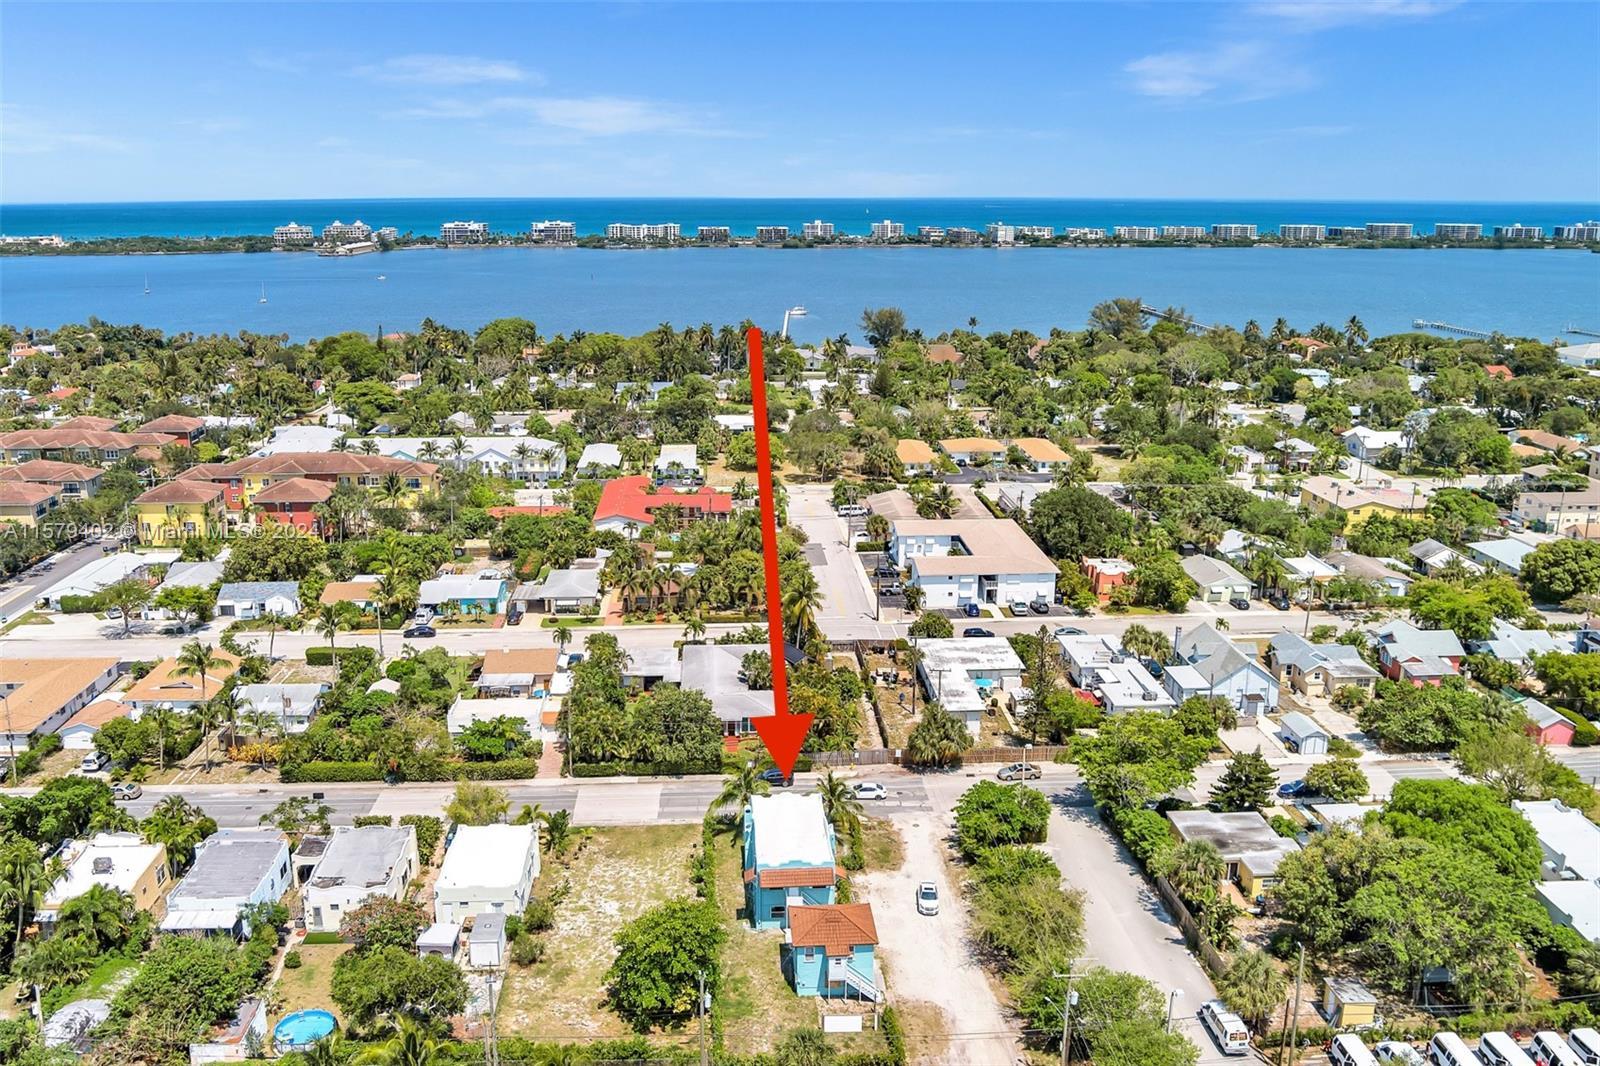 Explore this triplex in Lake Worth Beach, offering a lucrative investment with two recently updated 